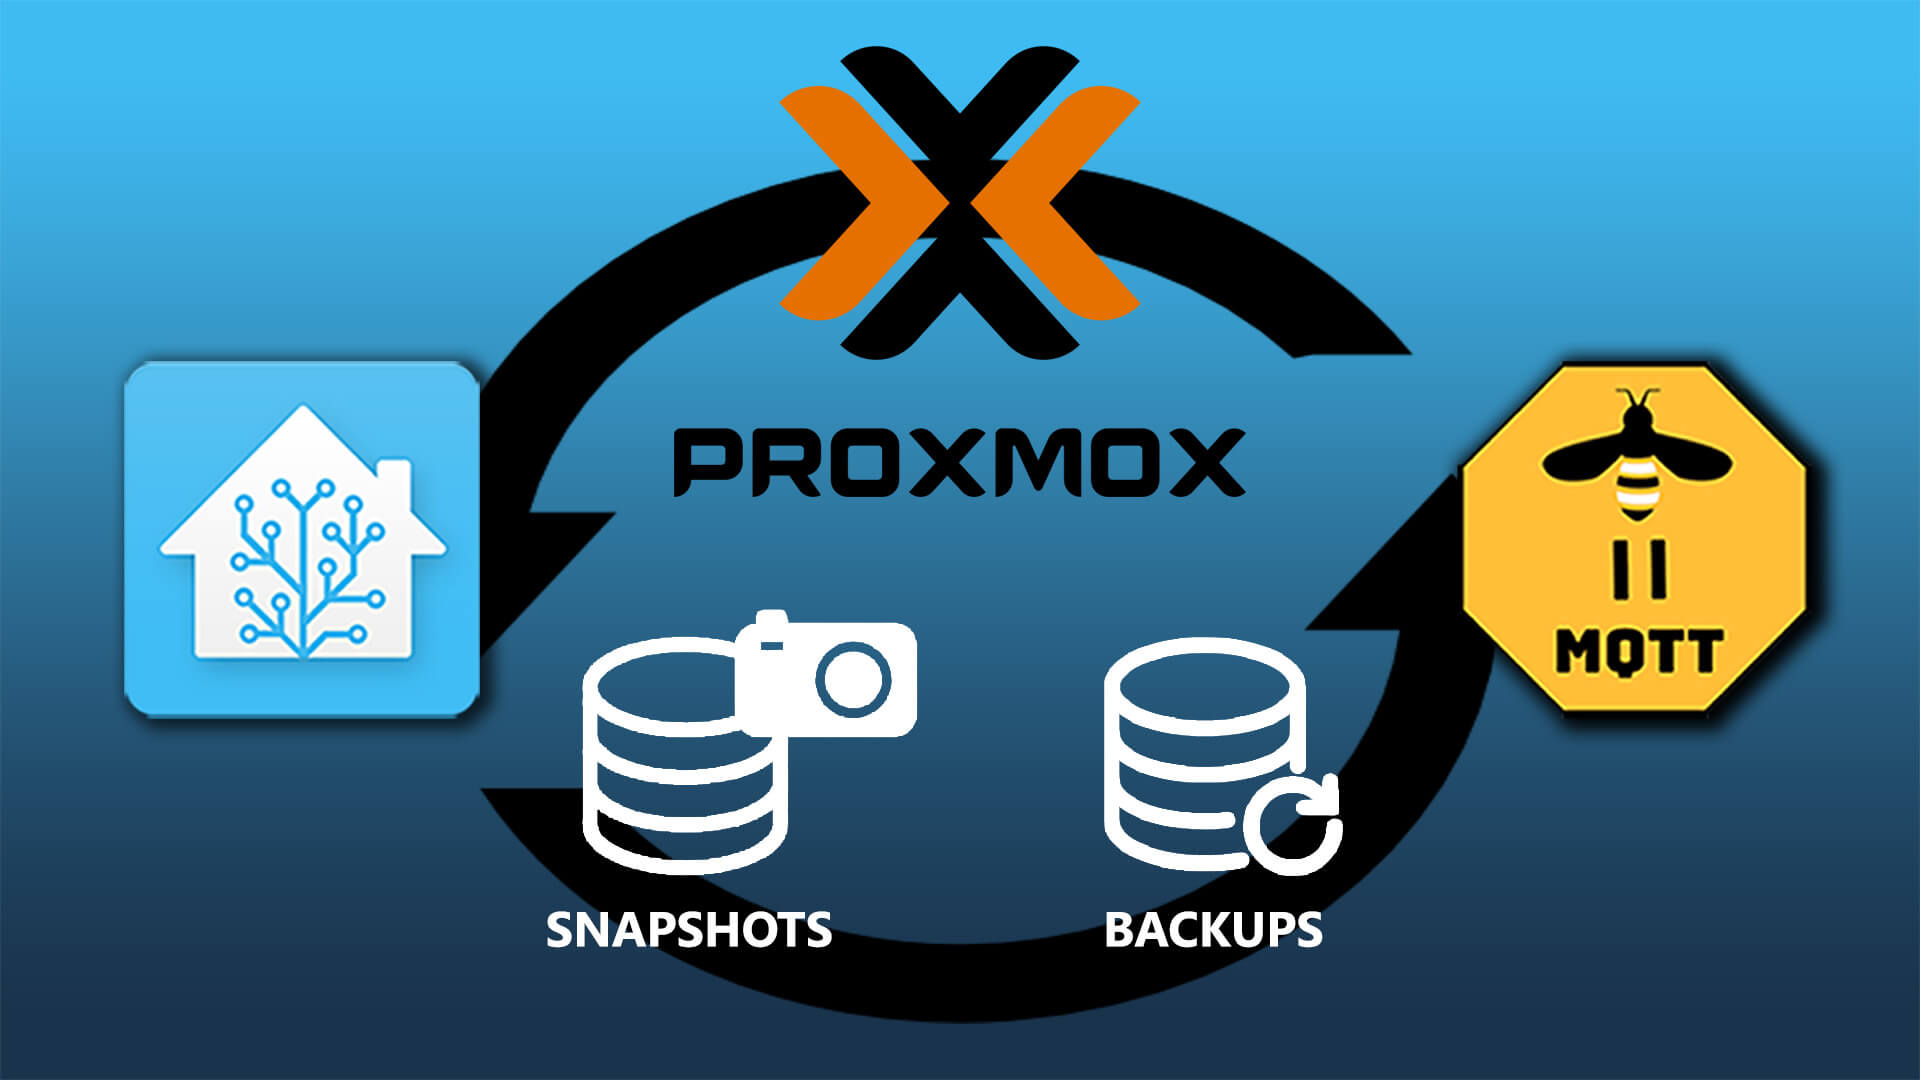 Proxmox Backups and Snapshots Home Assistant